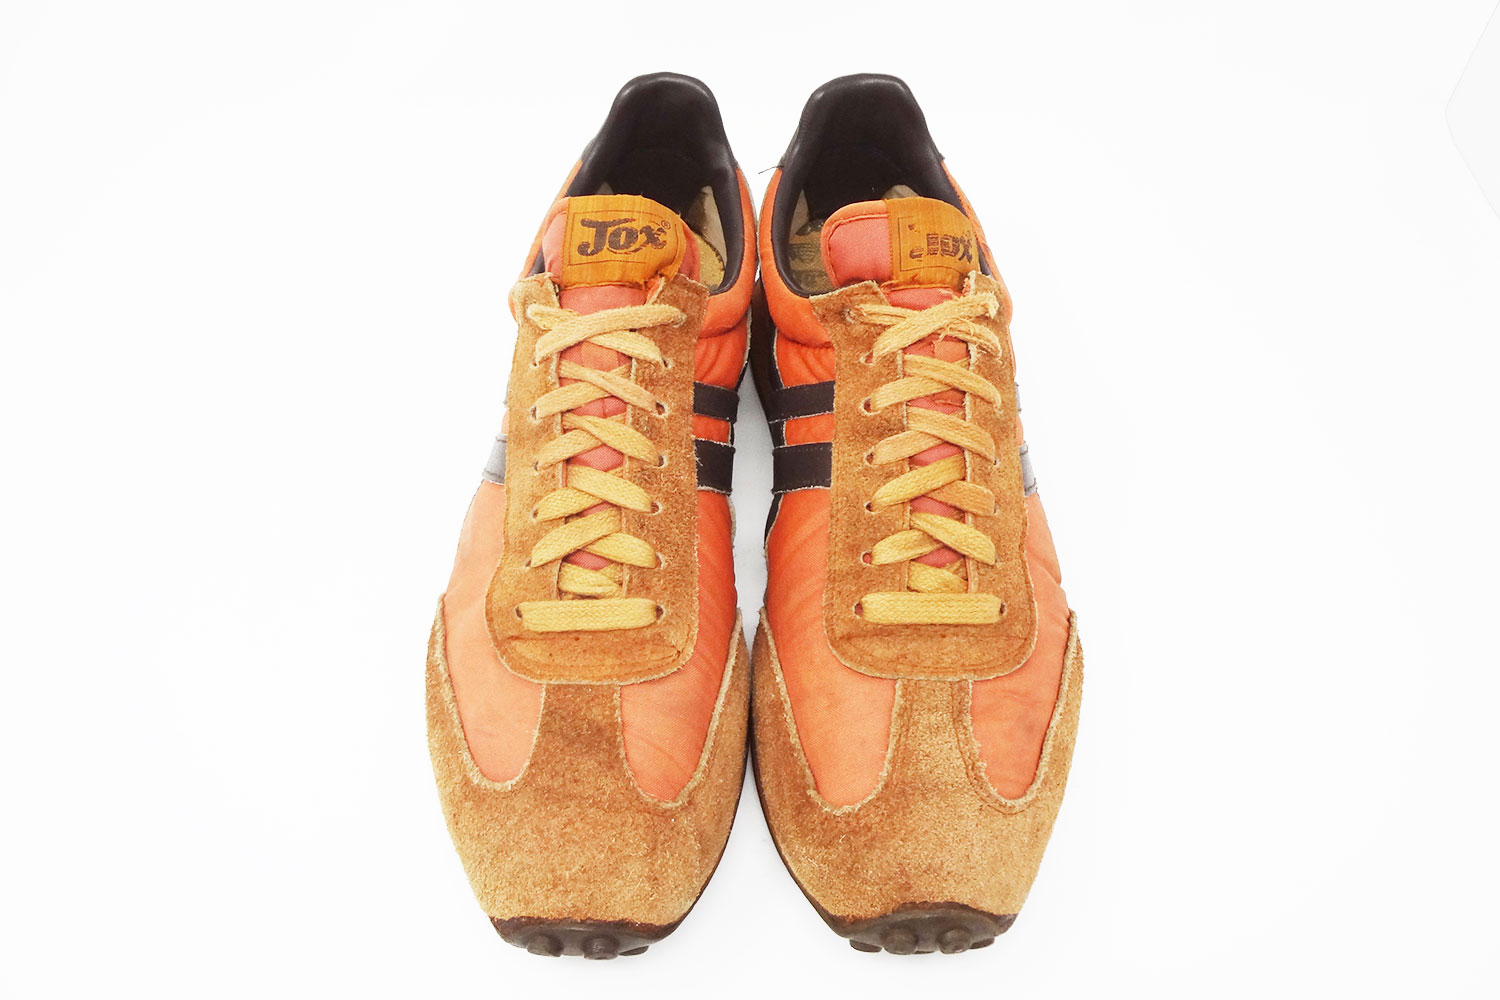 Old school 1970s 1980s Jox by Thom McAn vintage sneakers @ The Deffest